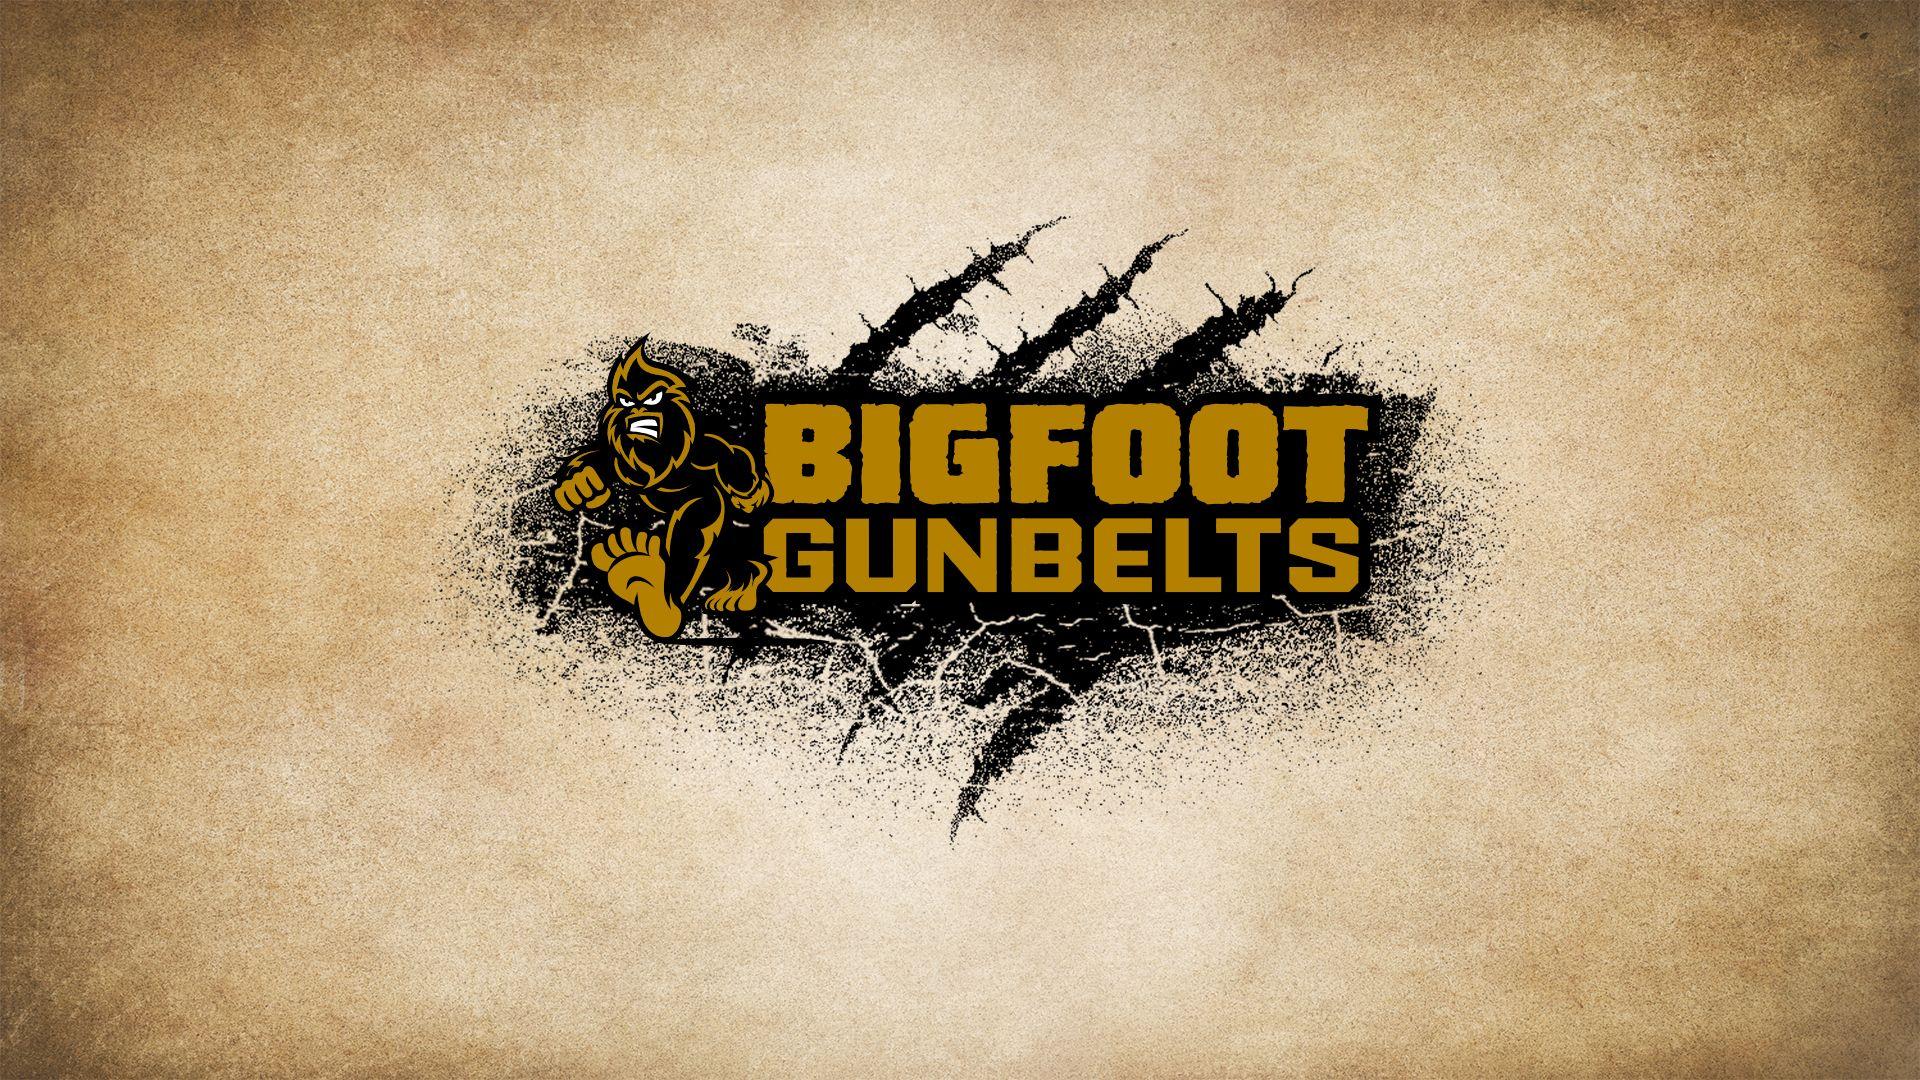 Free Bigfoot wallpaper for your computer or phone